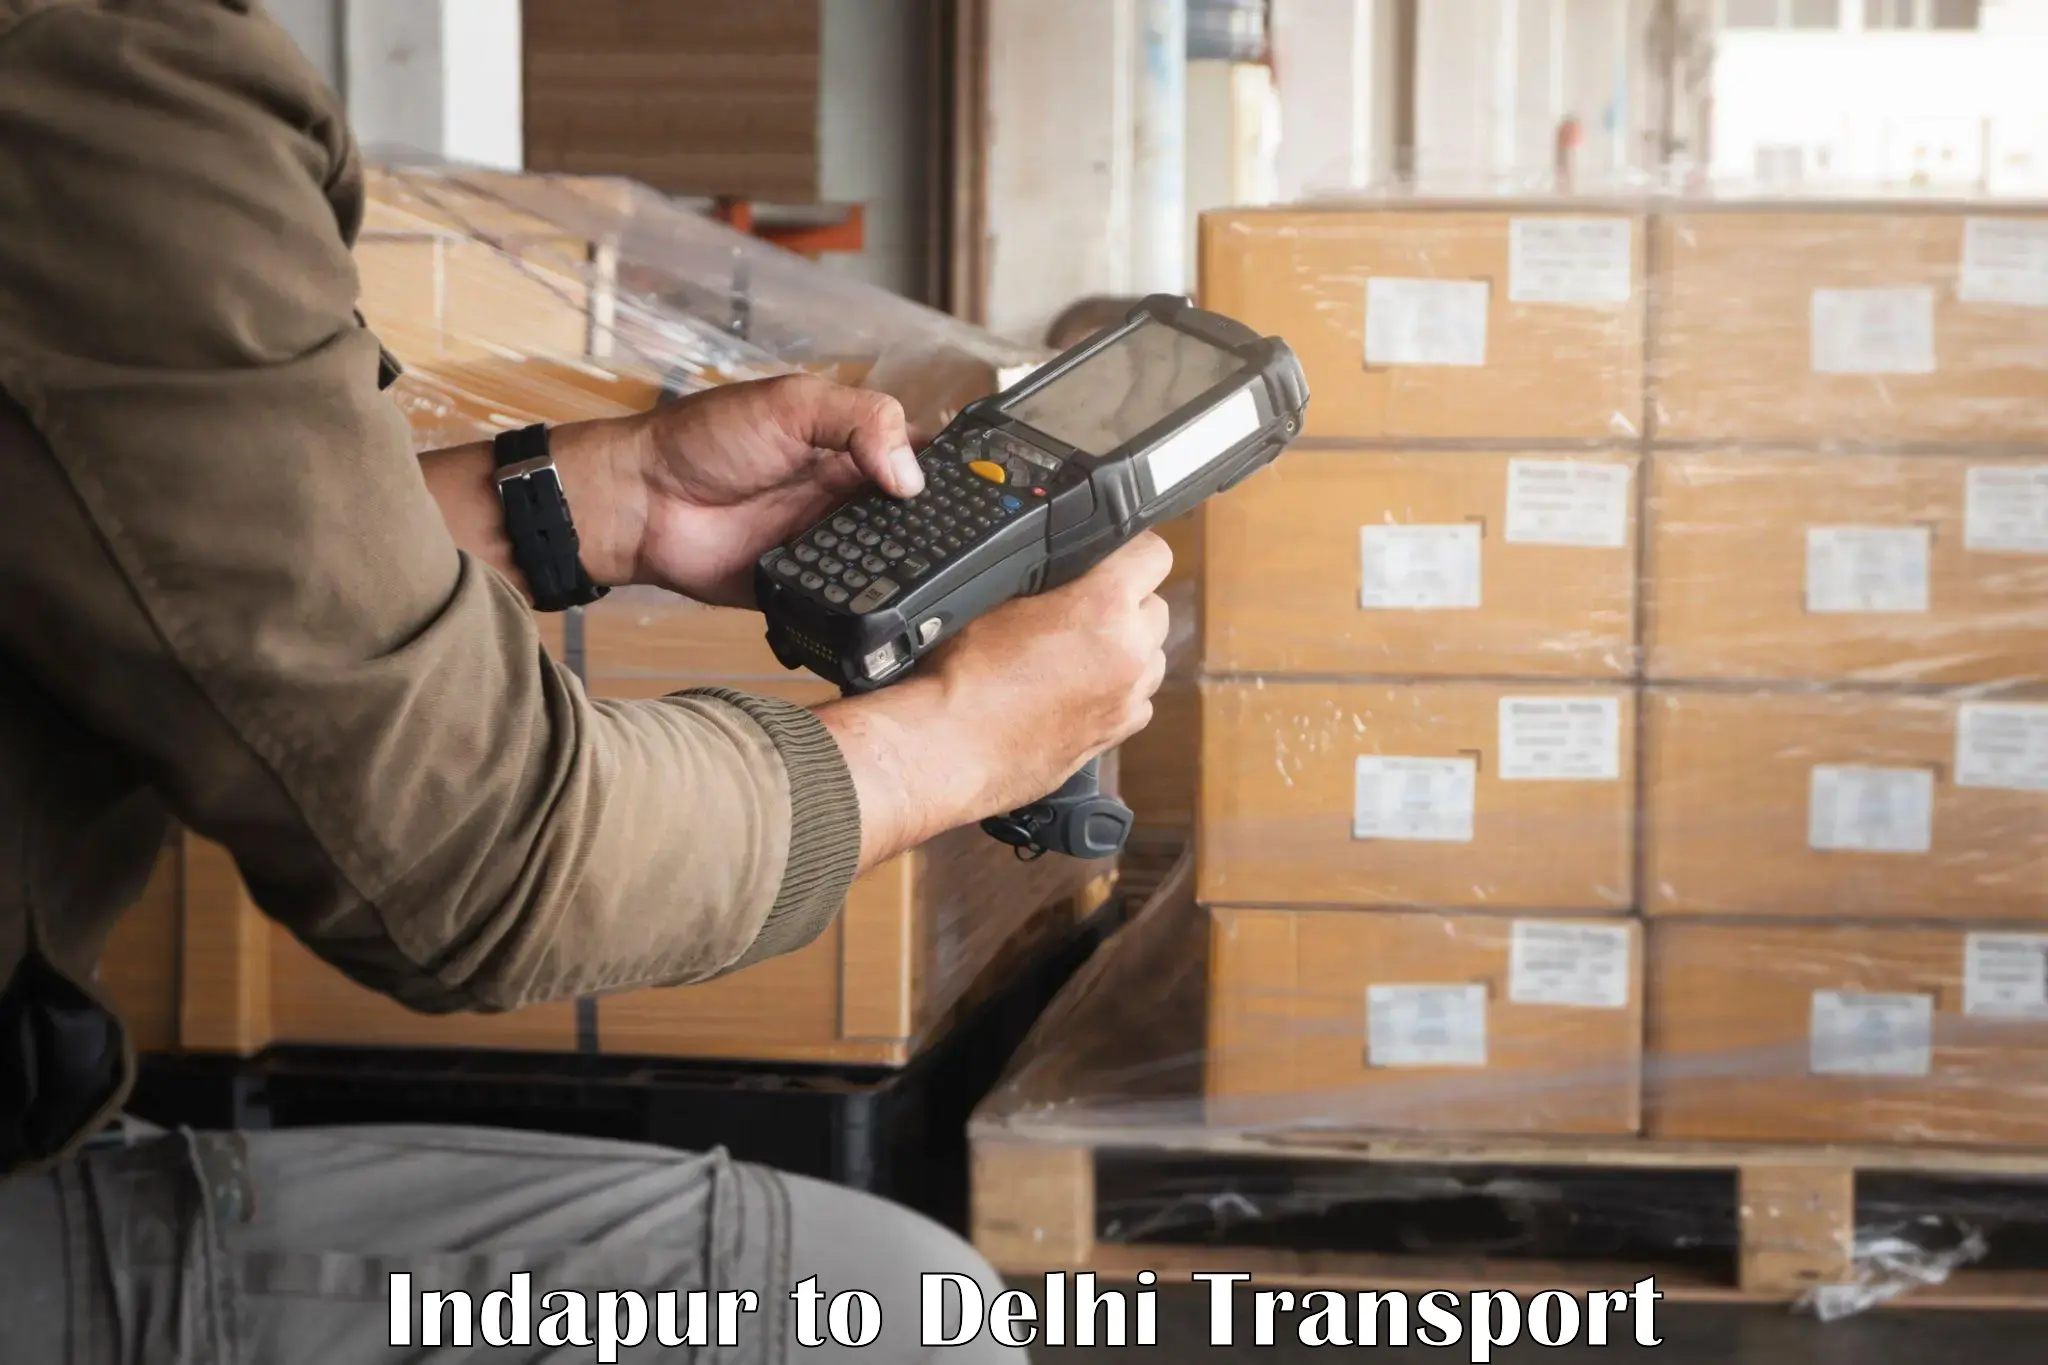 Package delivery services Indapur to Jawaharlal Nehru University New Delhi